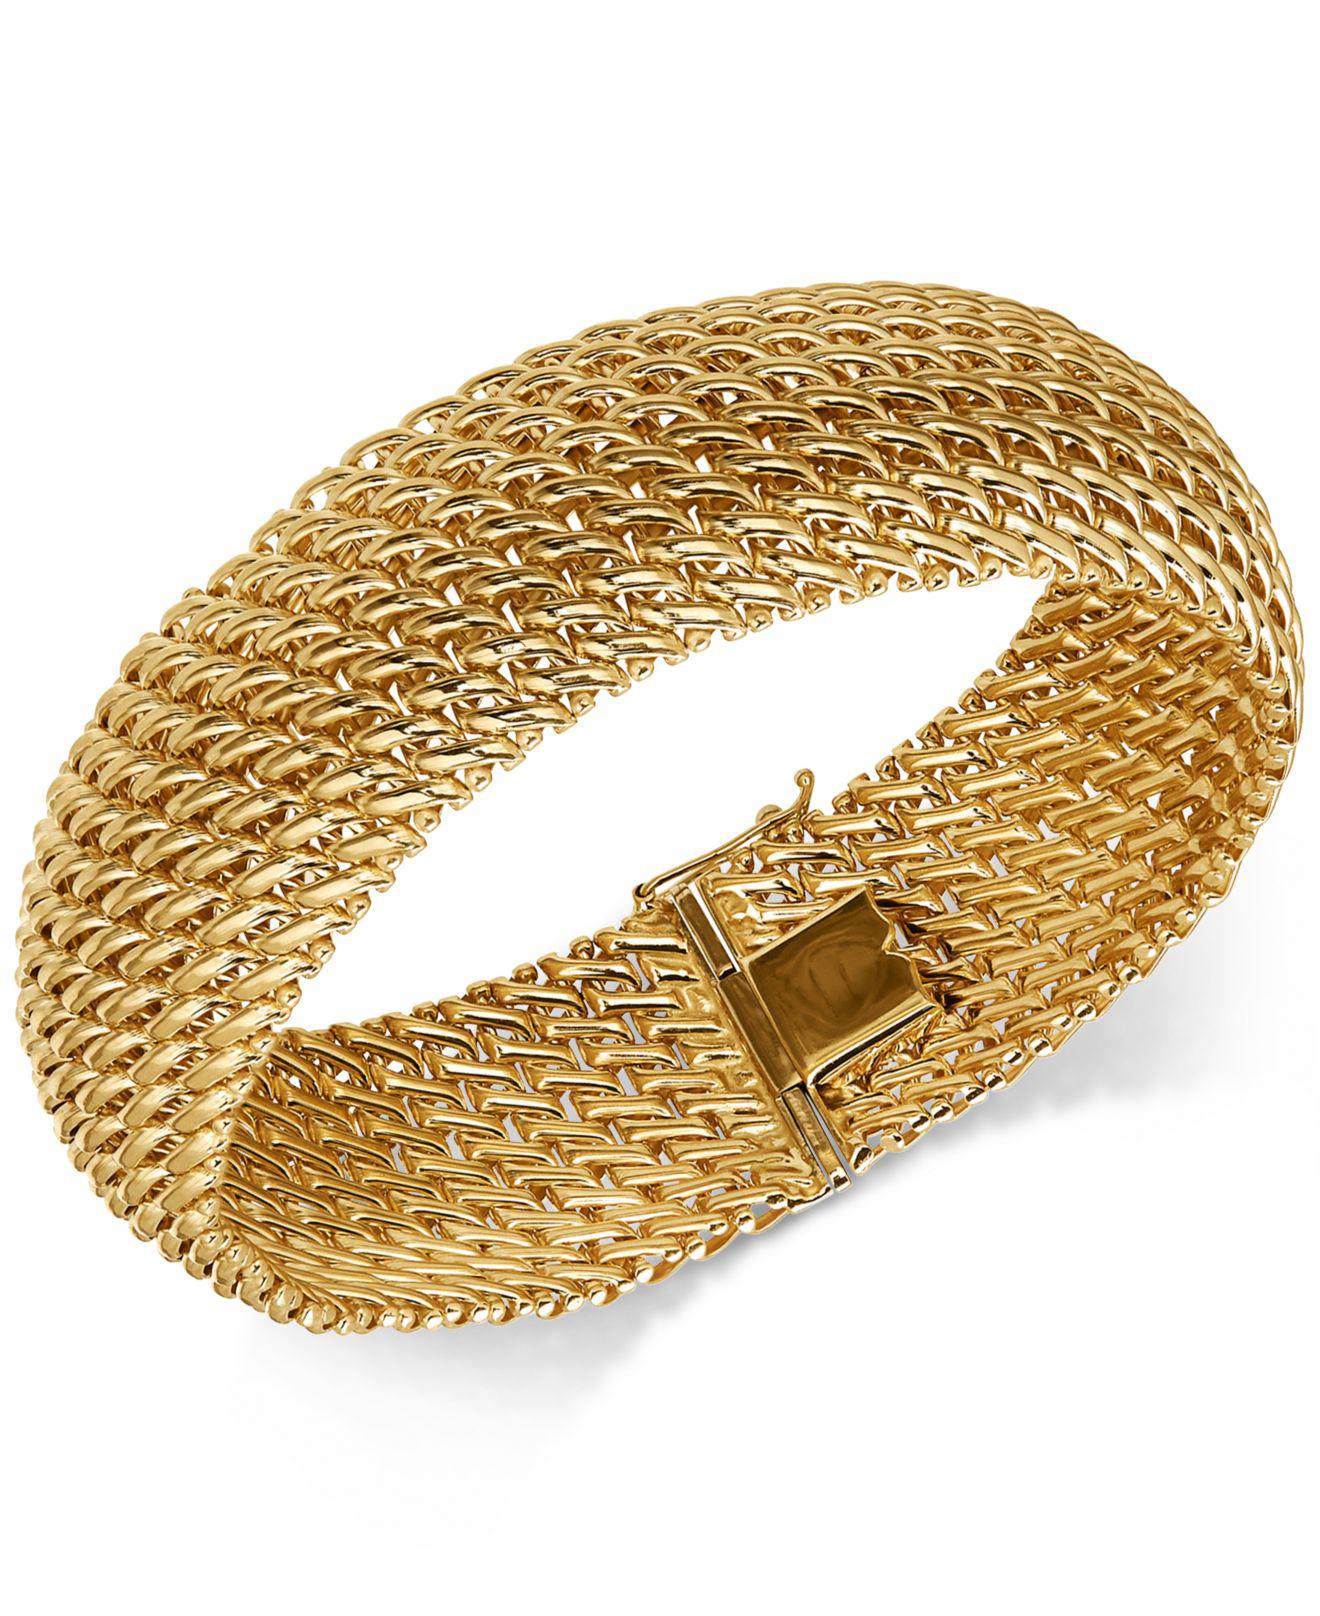 Sohi Women's Gold Ribbed Wire Cuff Bracelet | Connecticut Post Mall